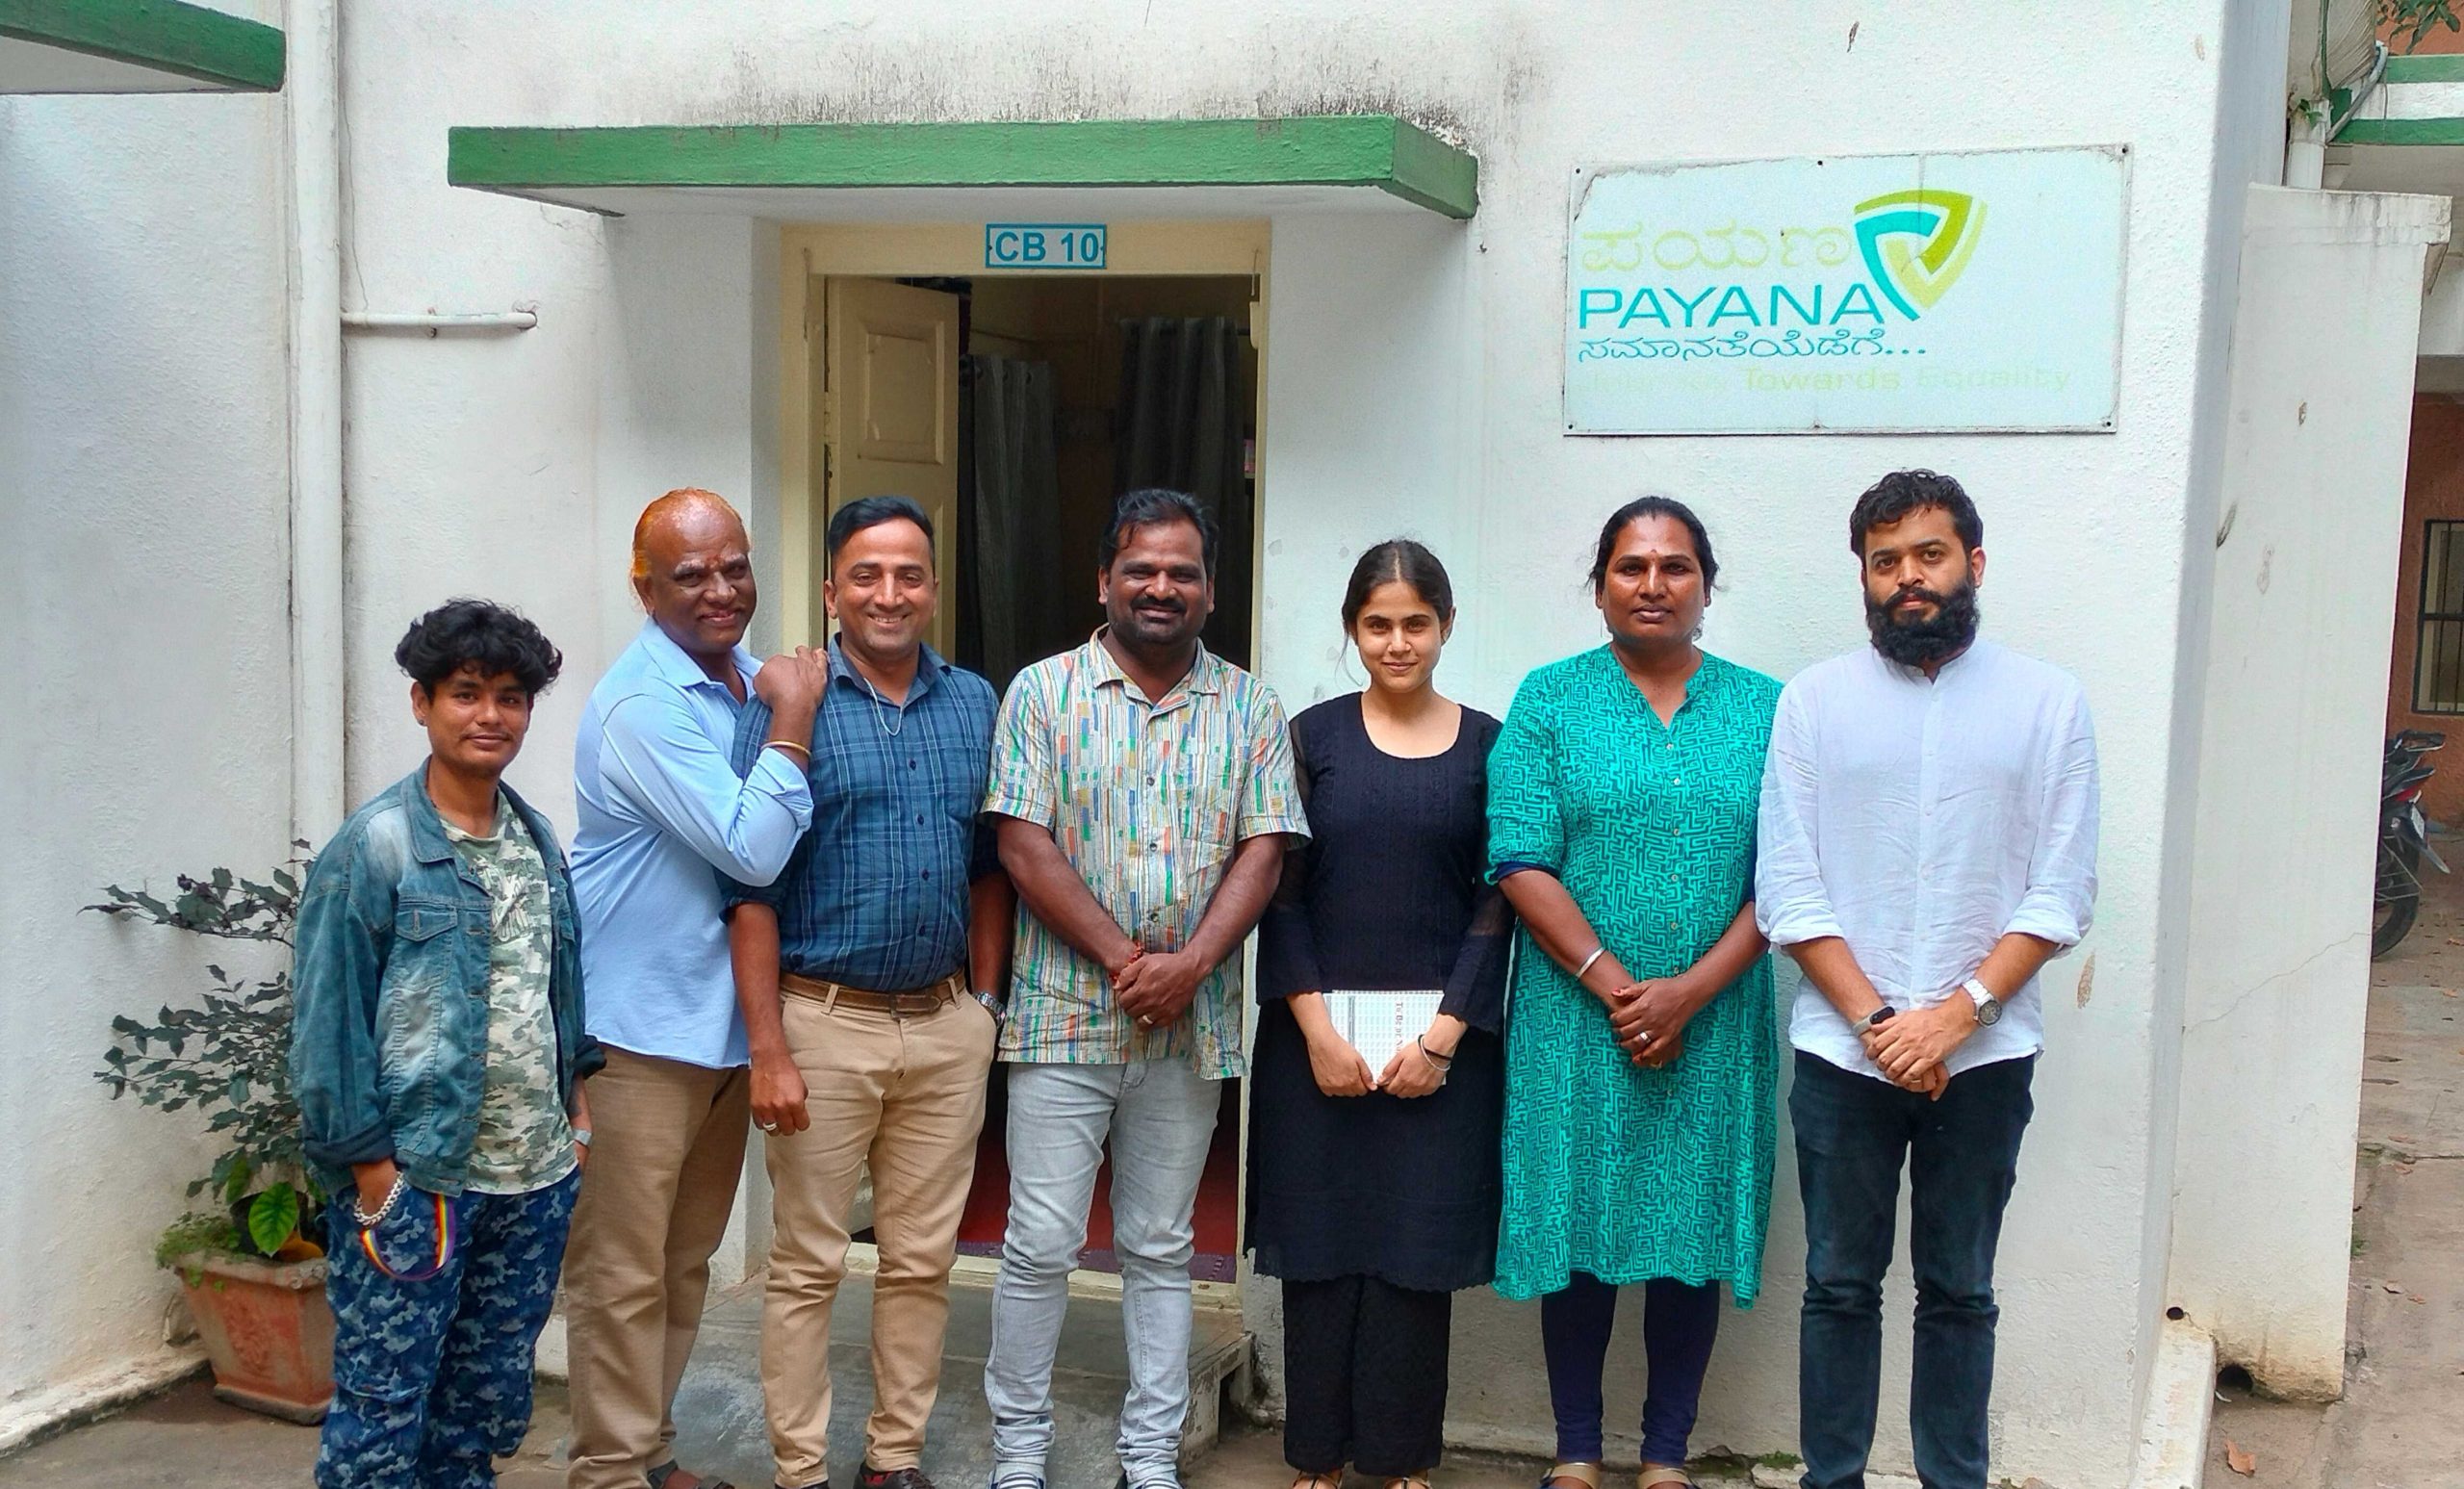 A Visit To Payana